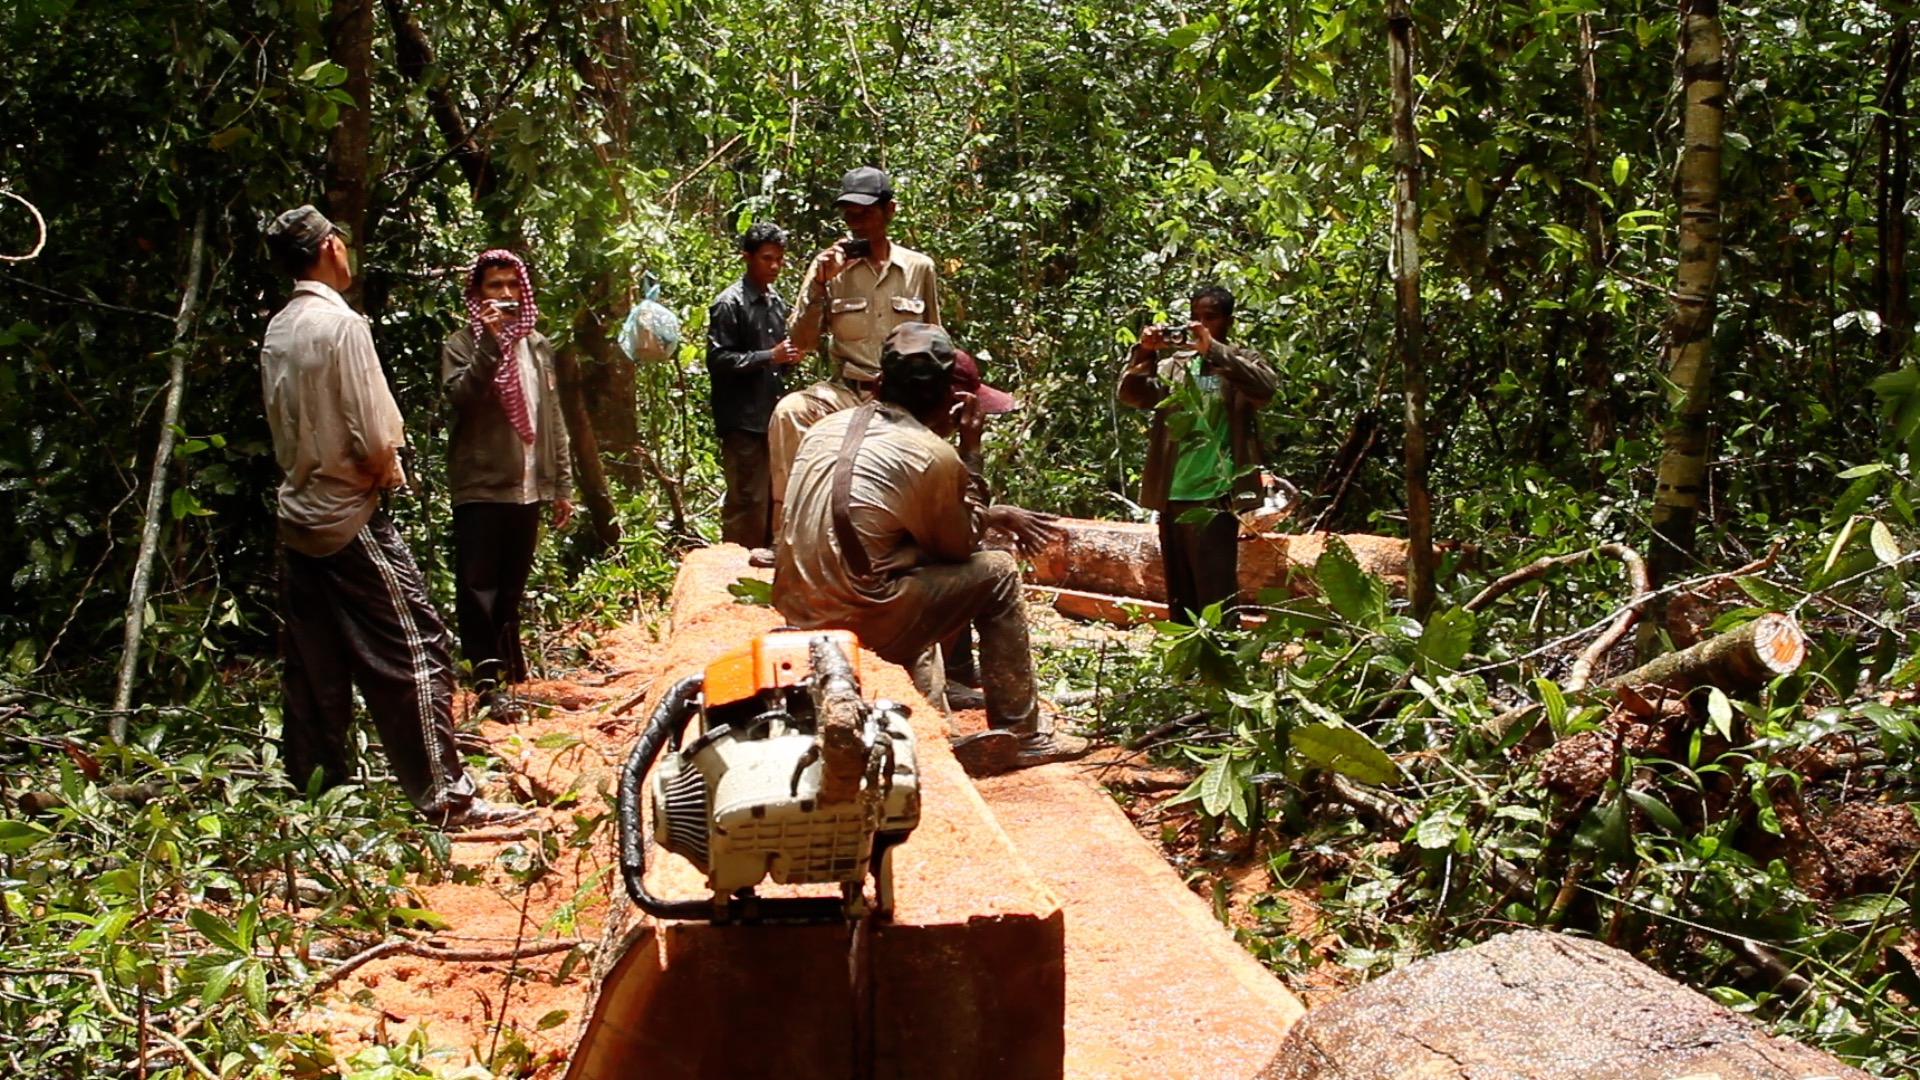 Chut Wutty, the late forest activist who was gunned down in 2012, apprehends illegal loggers in Prey Lang with members of the Prey Lang Community Network while on patrol through the forest in 2011. Image supplied.